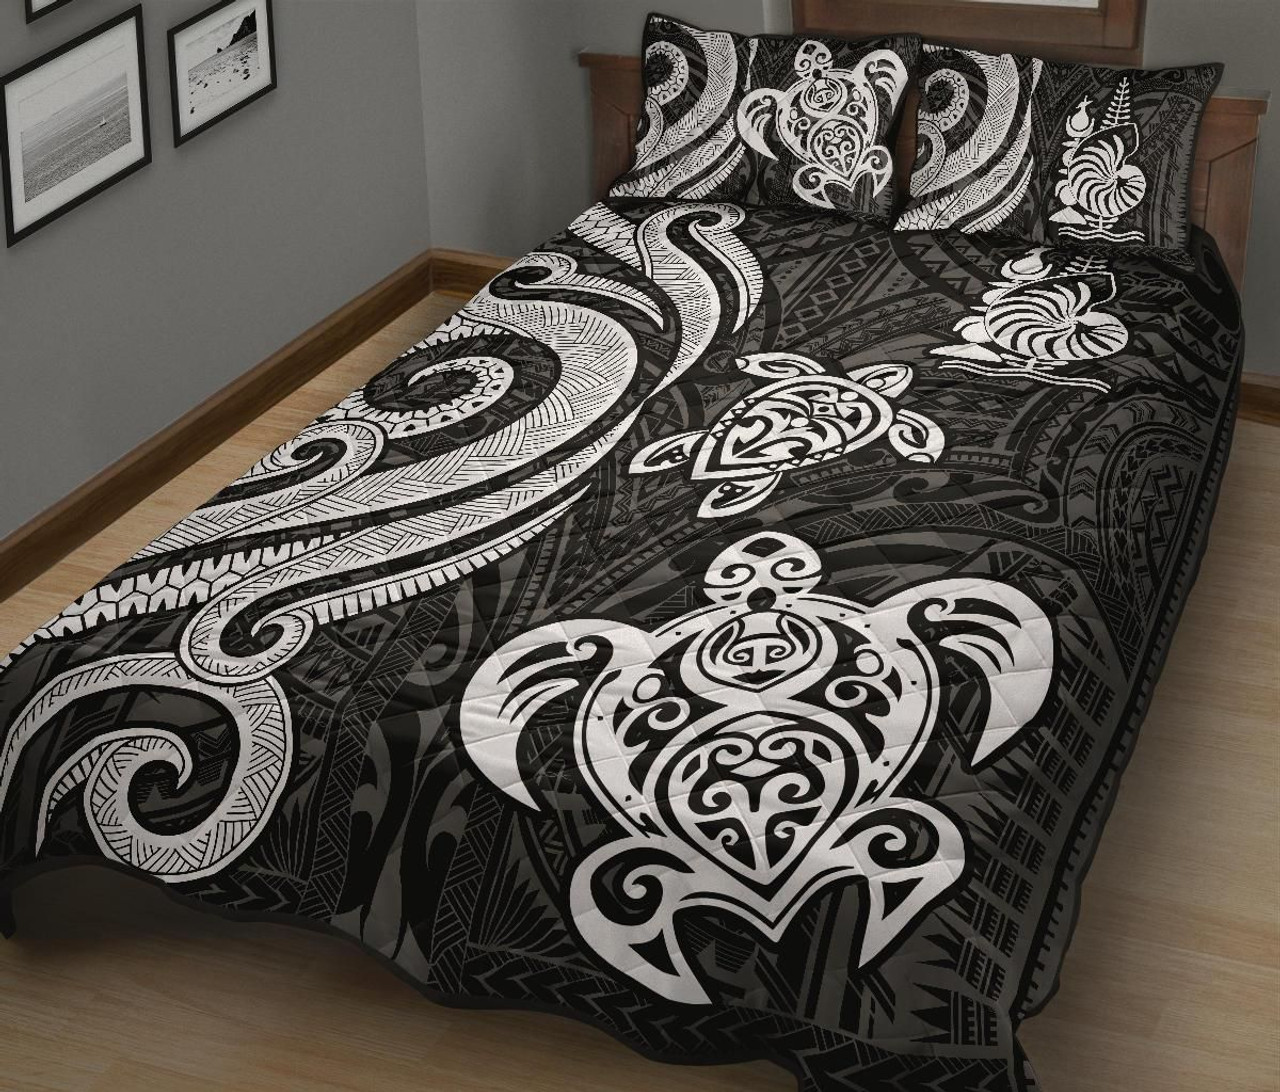 New Caledonia Quilt Bed Set - White Tentacle Turtle 2